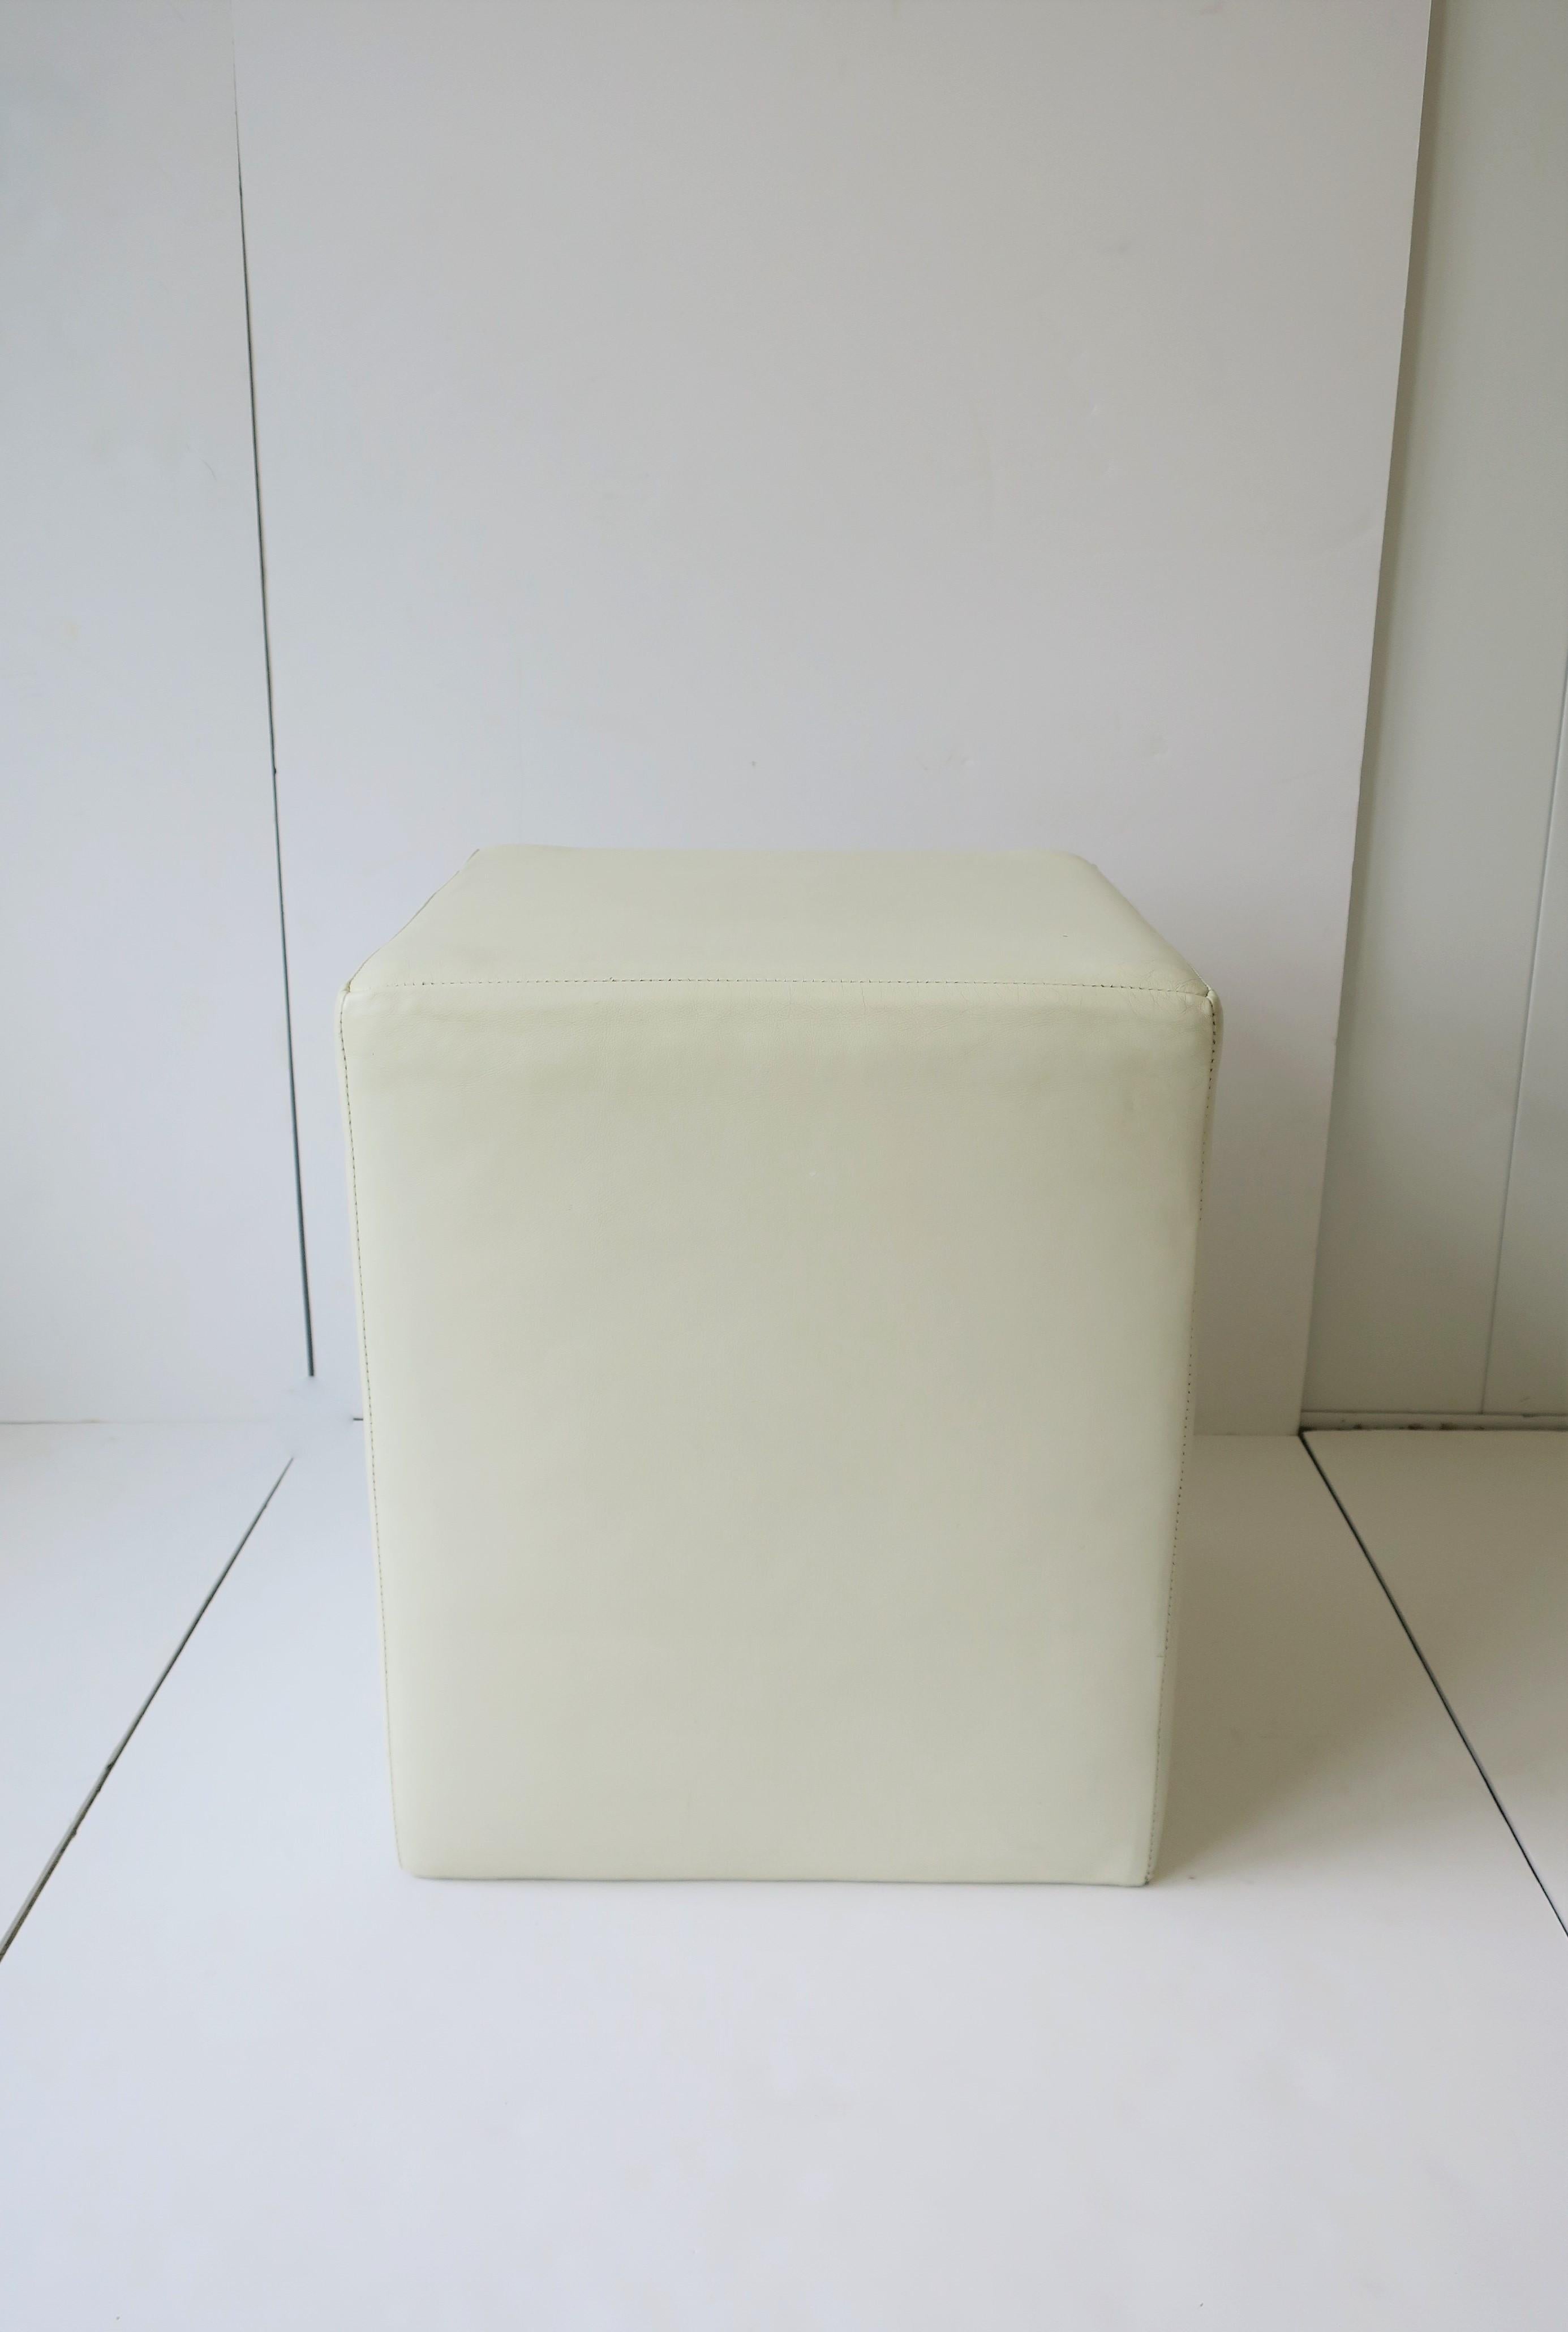 A Modern style white leather stool or end table. Piece makes a comfortable, moveable stool/seat, or even as a side or end table with is a firm environment on top (e.g. a book) as demonstrated in images. Dimensions: 15.5